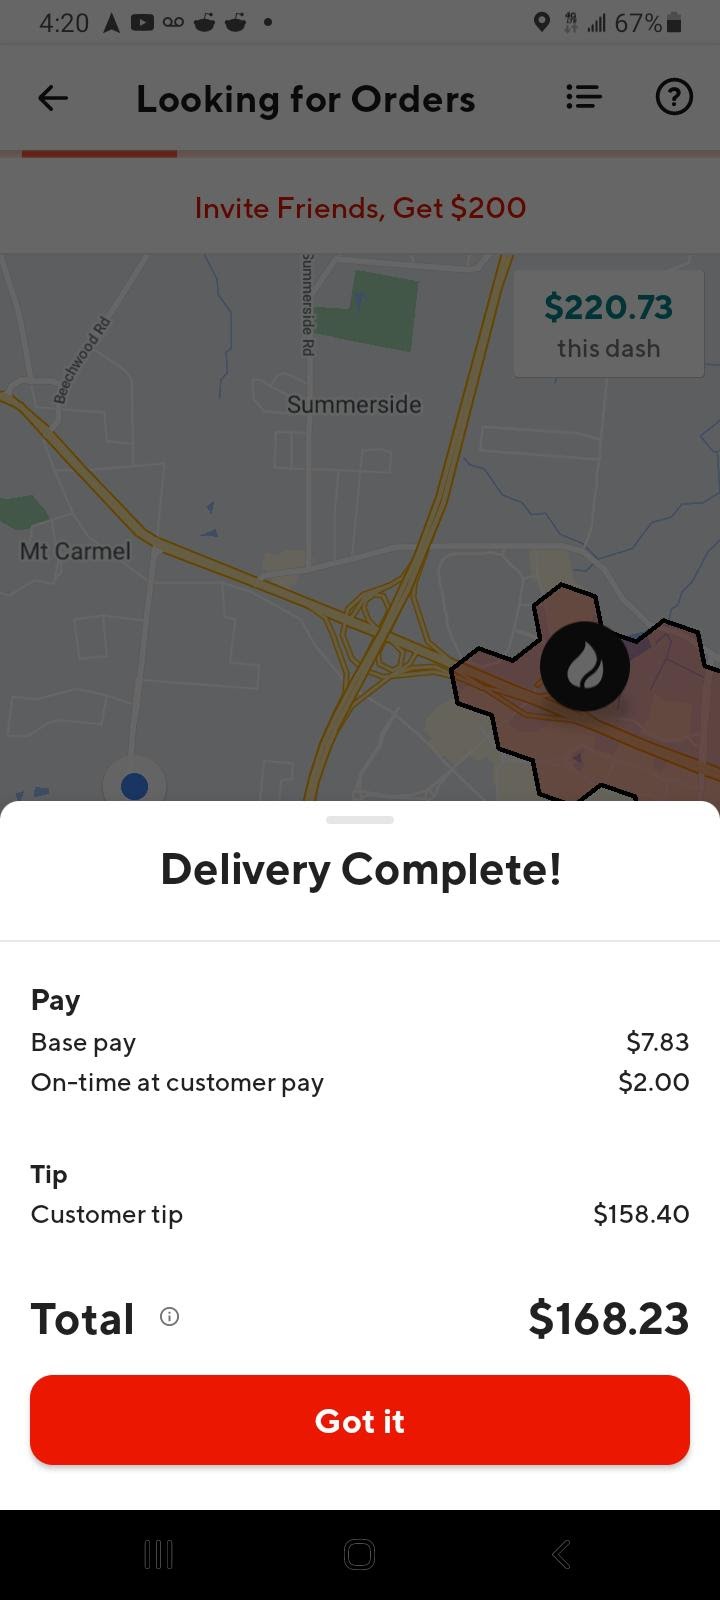 May be an image of text that says 'Delivery Complete! Pay Base pay On-time at customer pay $7.83 $2.00 Tip Customer tip $158.40 Total Total® $168.23 Gotit'